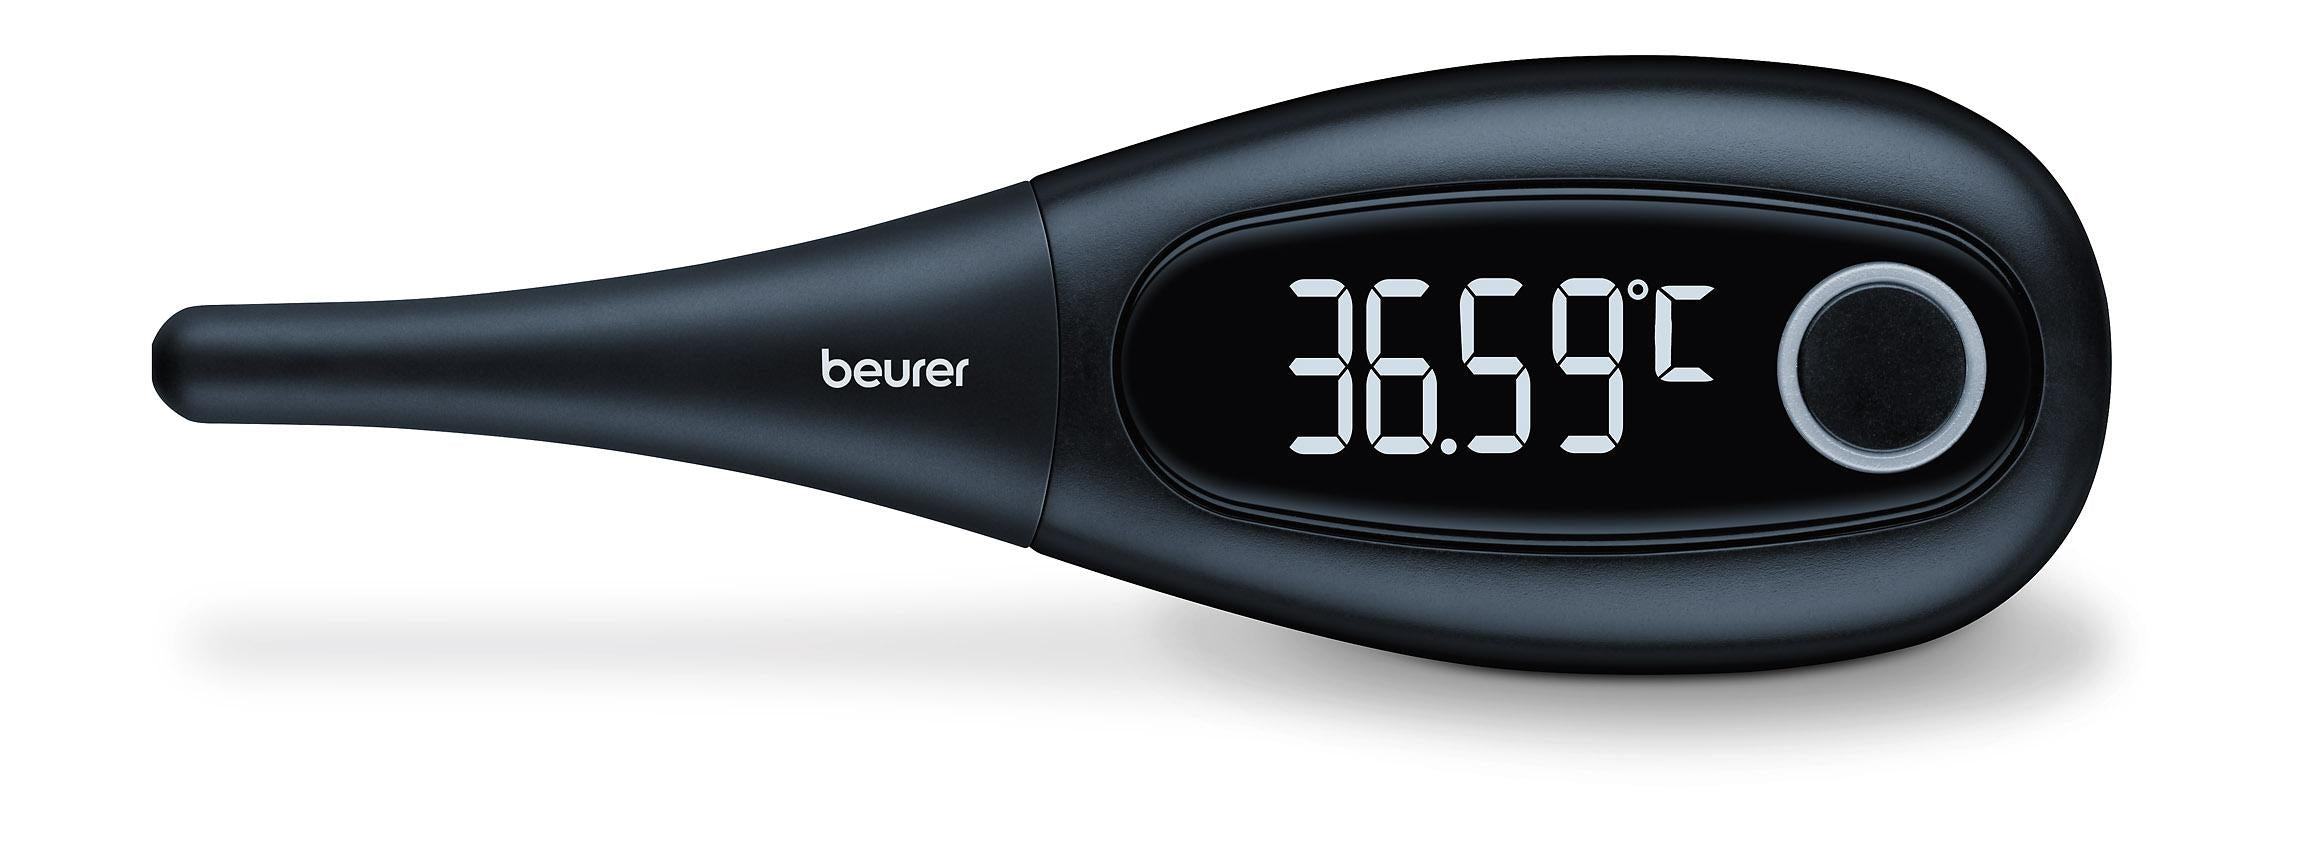 Beurer OT30 Basal Thermometer 